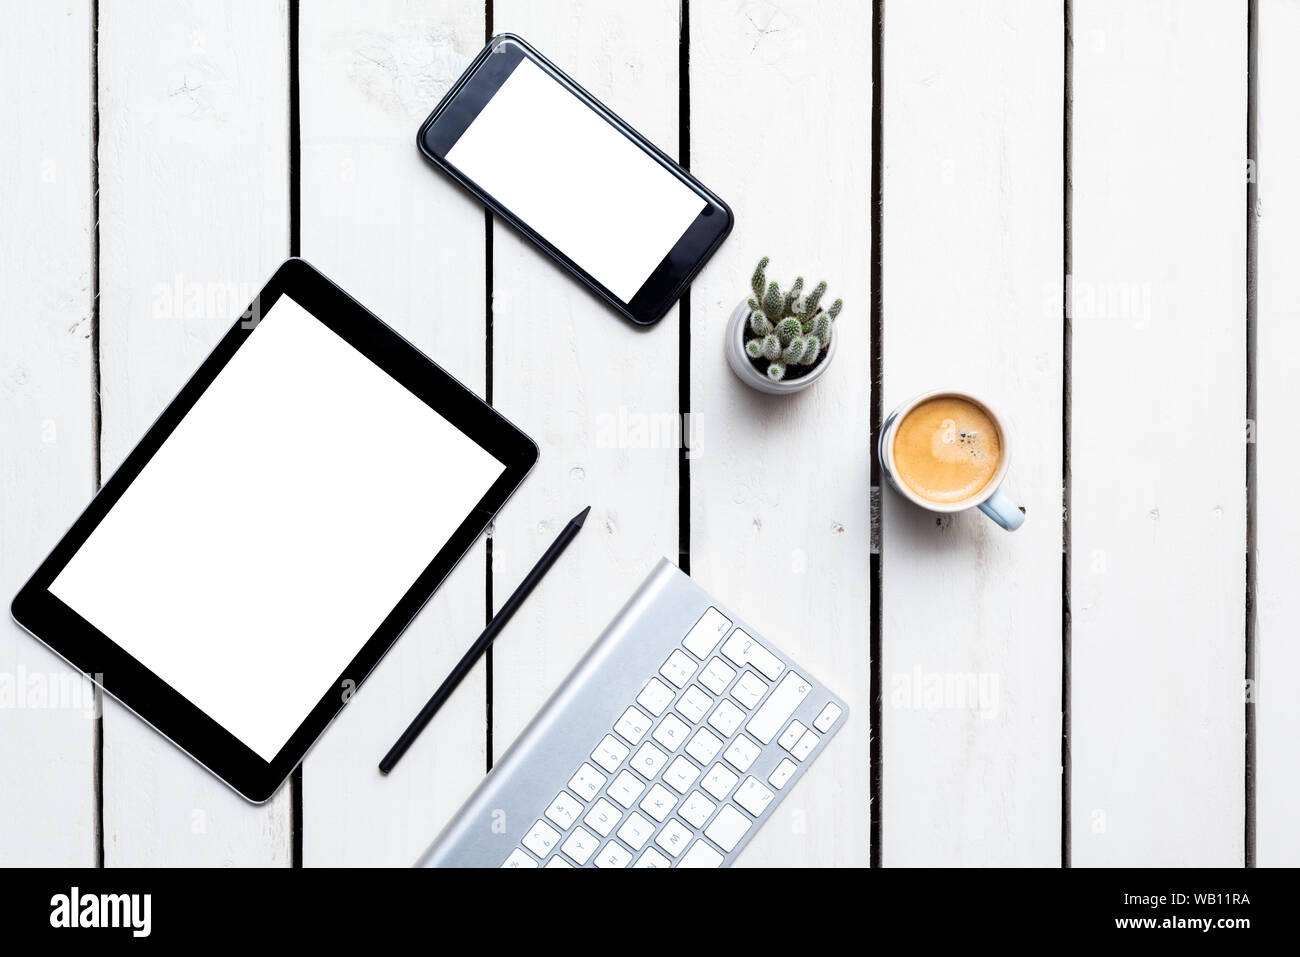 Office objects, devices with blank screens. White screen on smartphone and tablet on wooden table Stock Photo